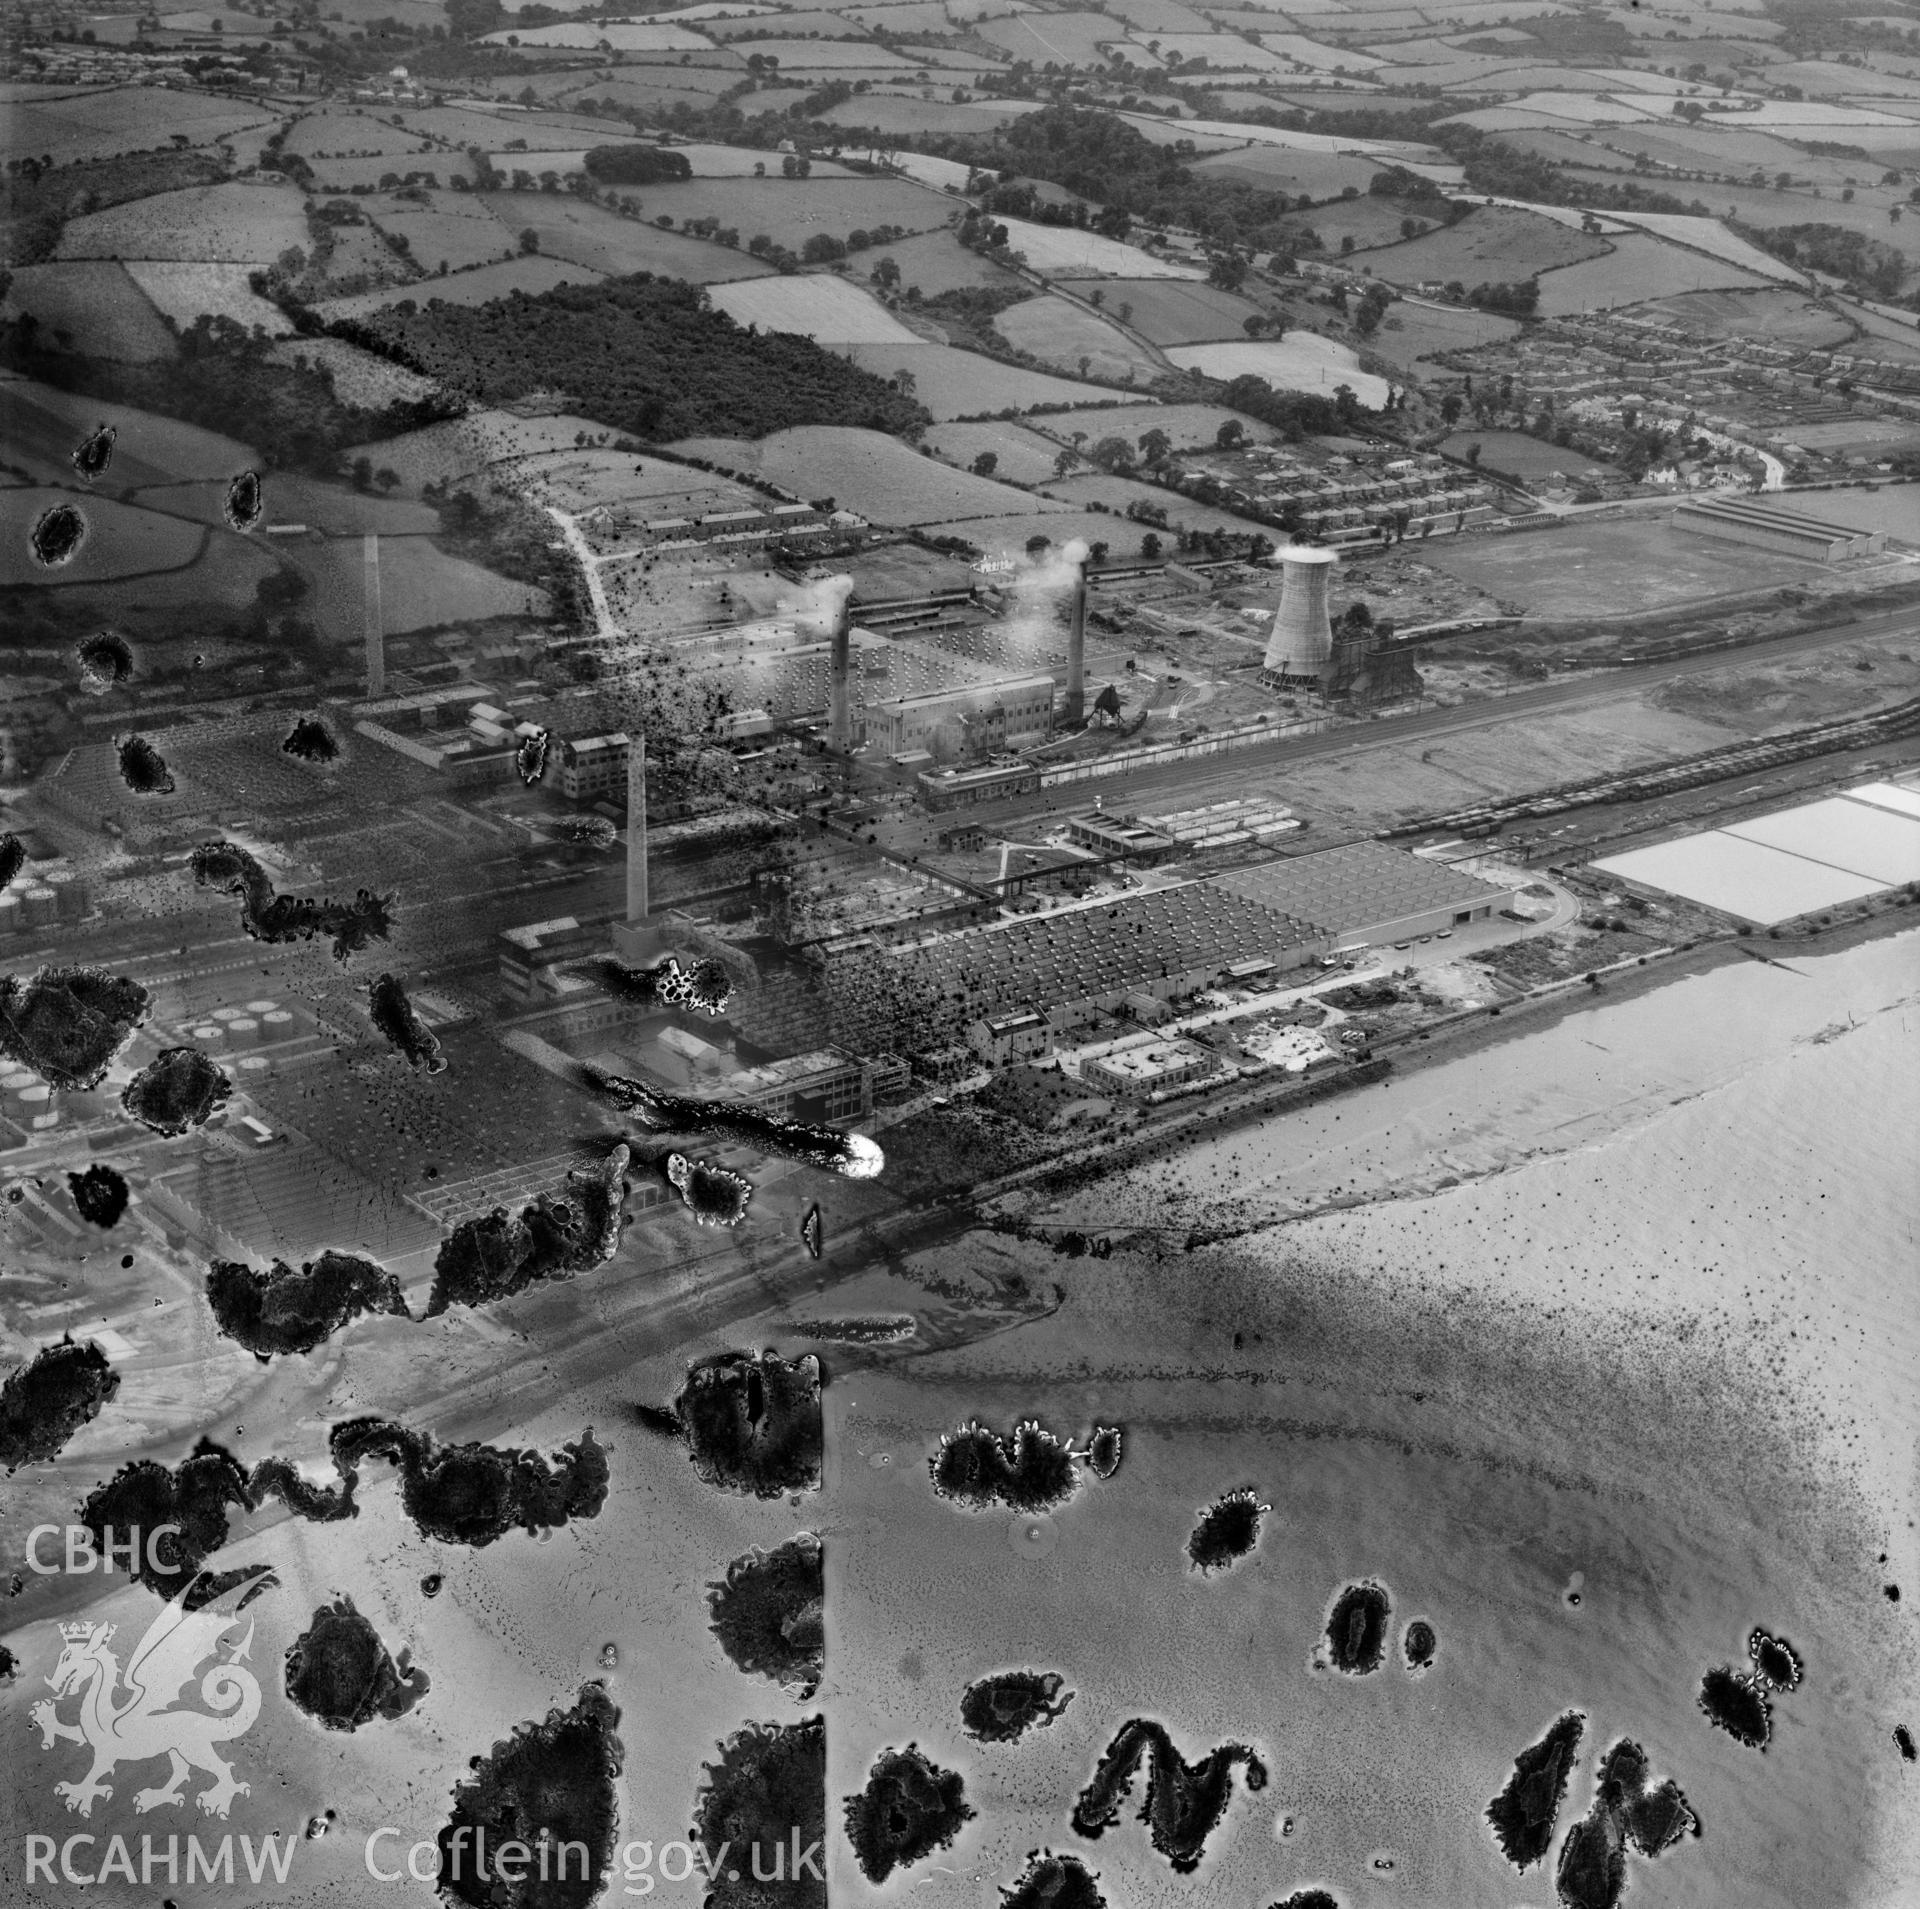 View of Courtaulds Ltd., Greenfields Works, Holywell